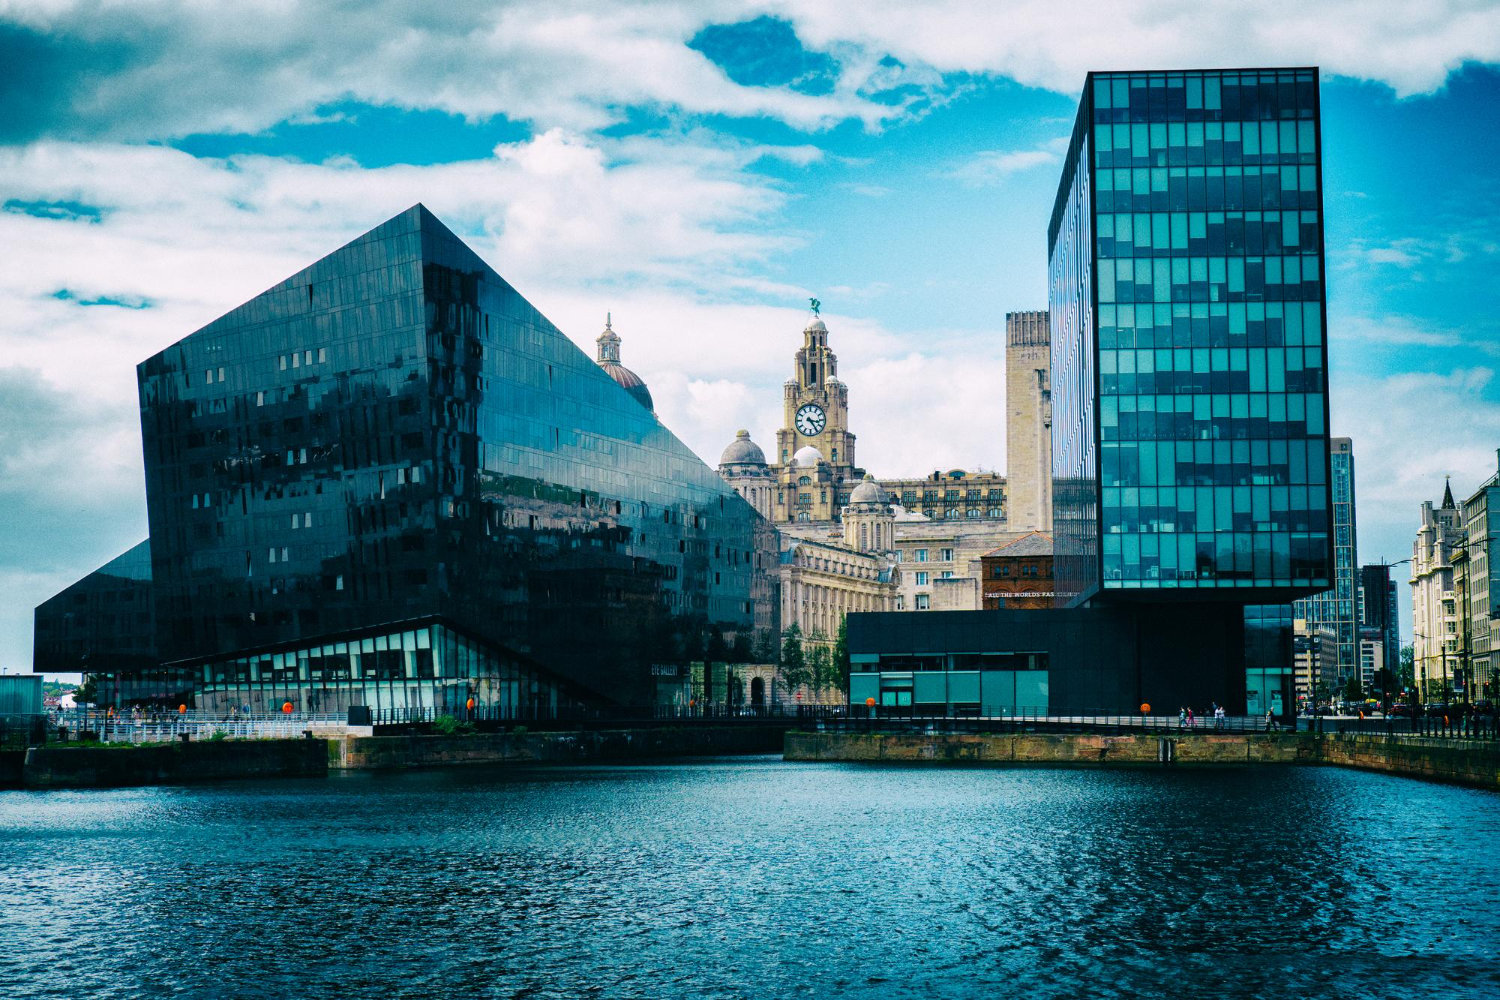 Hotels in Liverpool are waiting for you to discover the city's beauty! Find the best hotel deals.